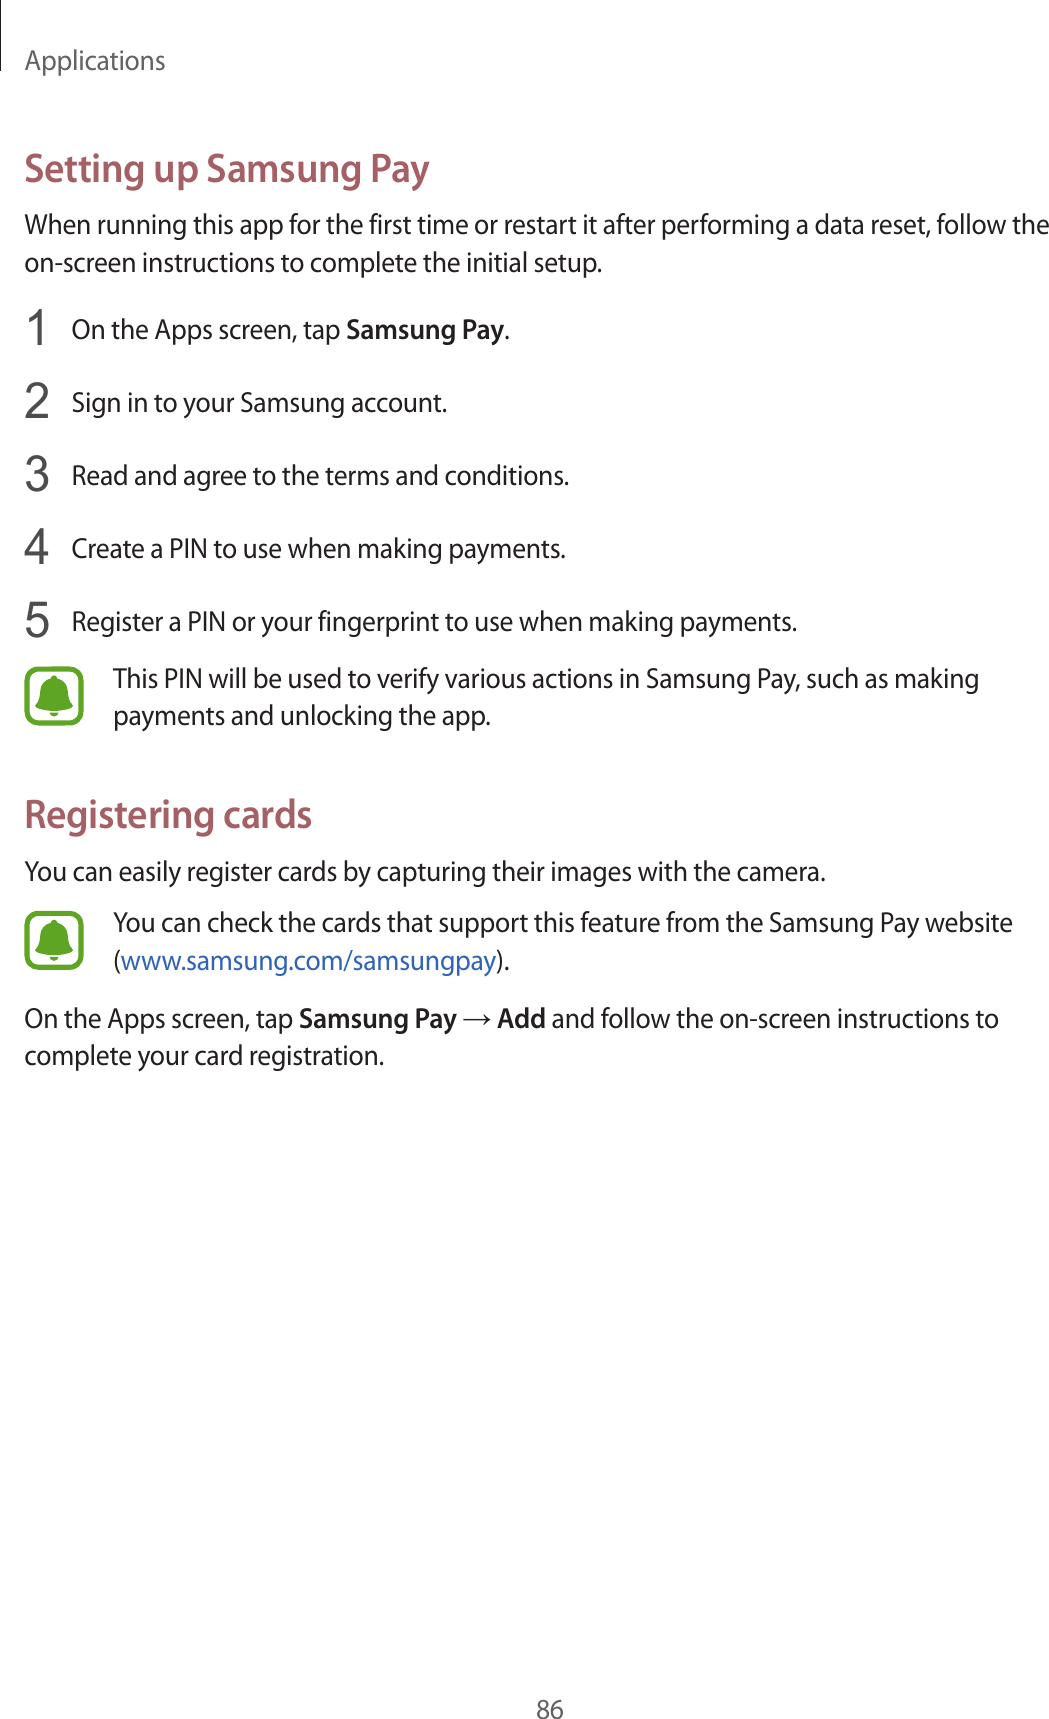 Applications86Setting up Samsung PayWhen running this app for the first time or restart it after performing a data reset, follow the on-screen instructions to complete the initial setup.1  On the Apps screen, tap Samsung Pay.2  Sign in to your Samsung account.3  Read and agree to the terms and conditions.4  Create a PIN to use when making payments.5  Register a PIN or your fingerprint to use when making payments.This PIN will be used to verify various actions in Samsung Pay, such as making payments and unlocking the app.Registering cardsYou can easily register cards by capturing their images with the camera.You can check the cards that support this feature from the Samsung Pay website (www.samsung.com/samsungpay).On the Apps screen, tap Samsung Pay → Add and follow the on-screen instructions to complete your card registration.